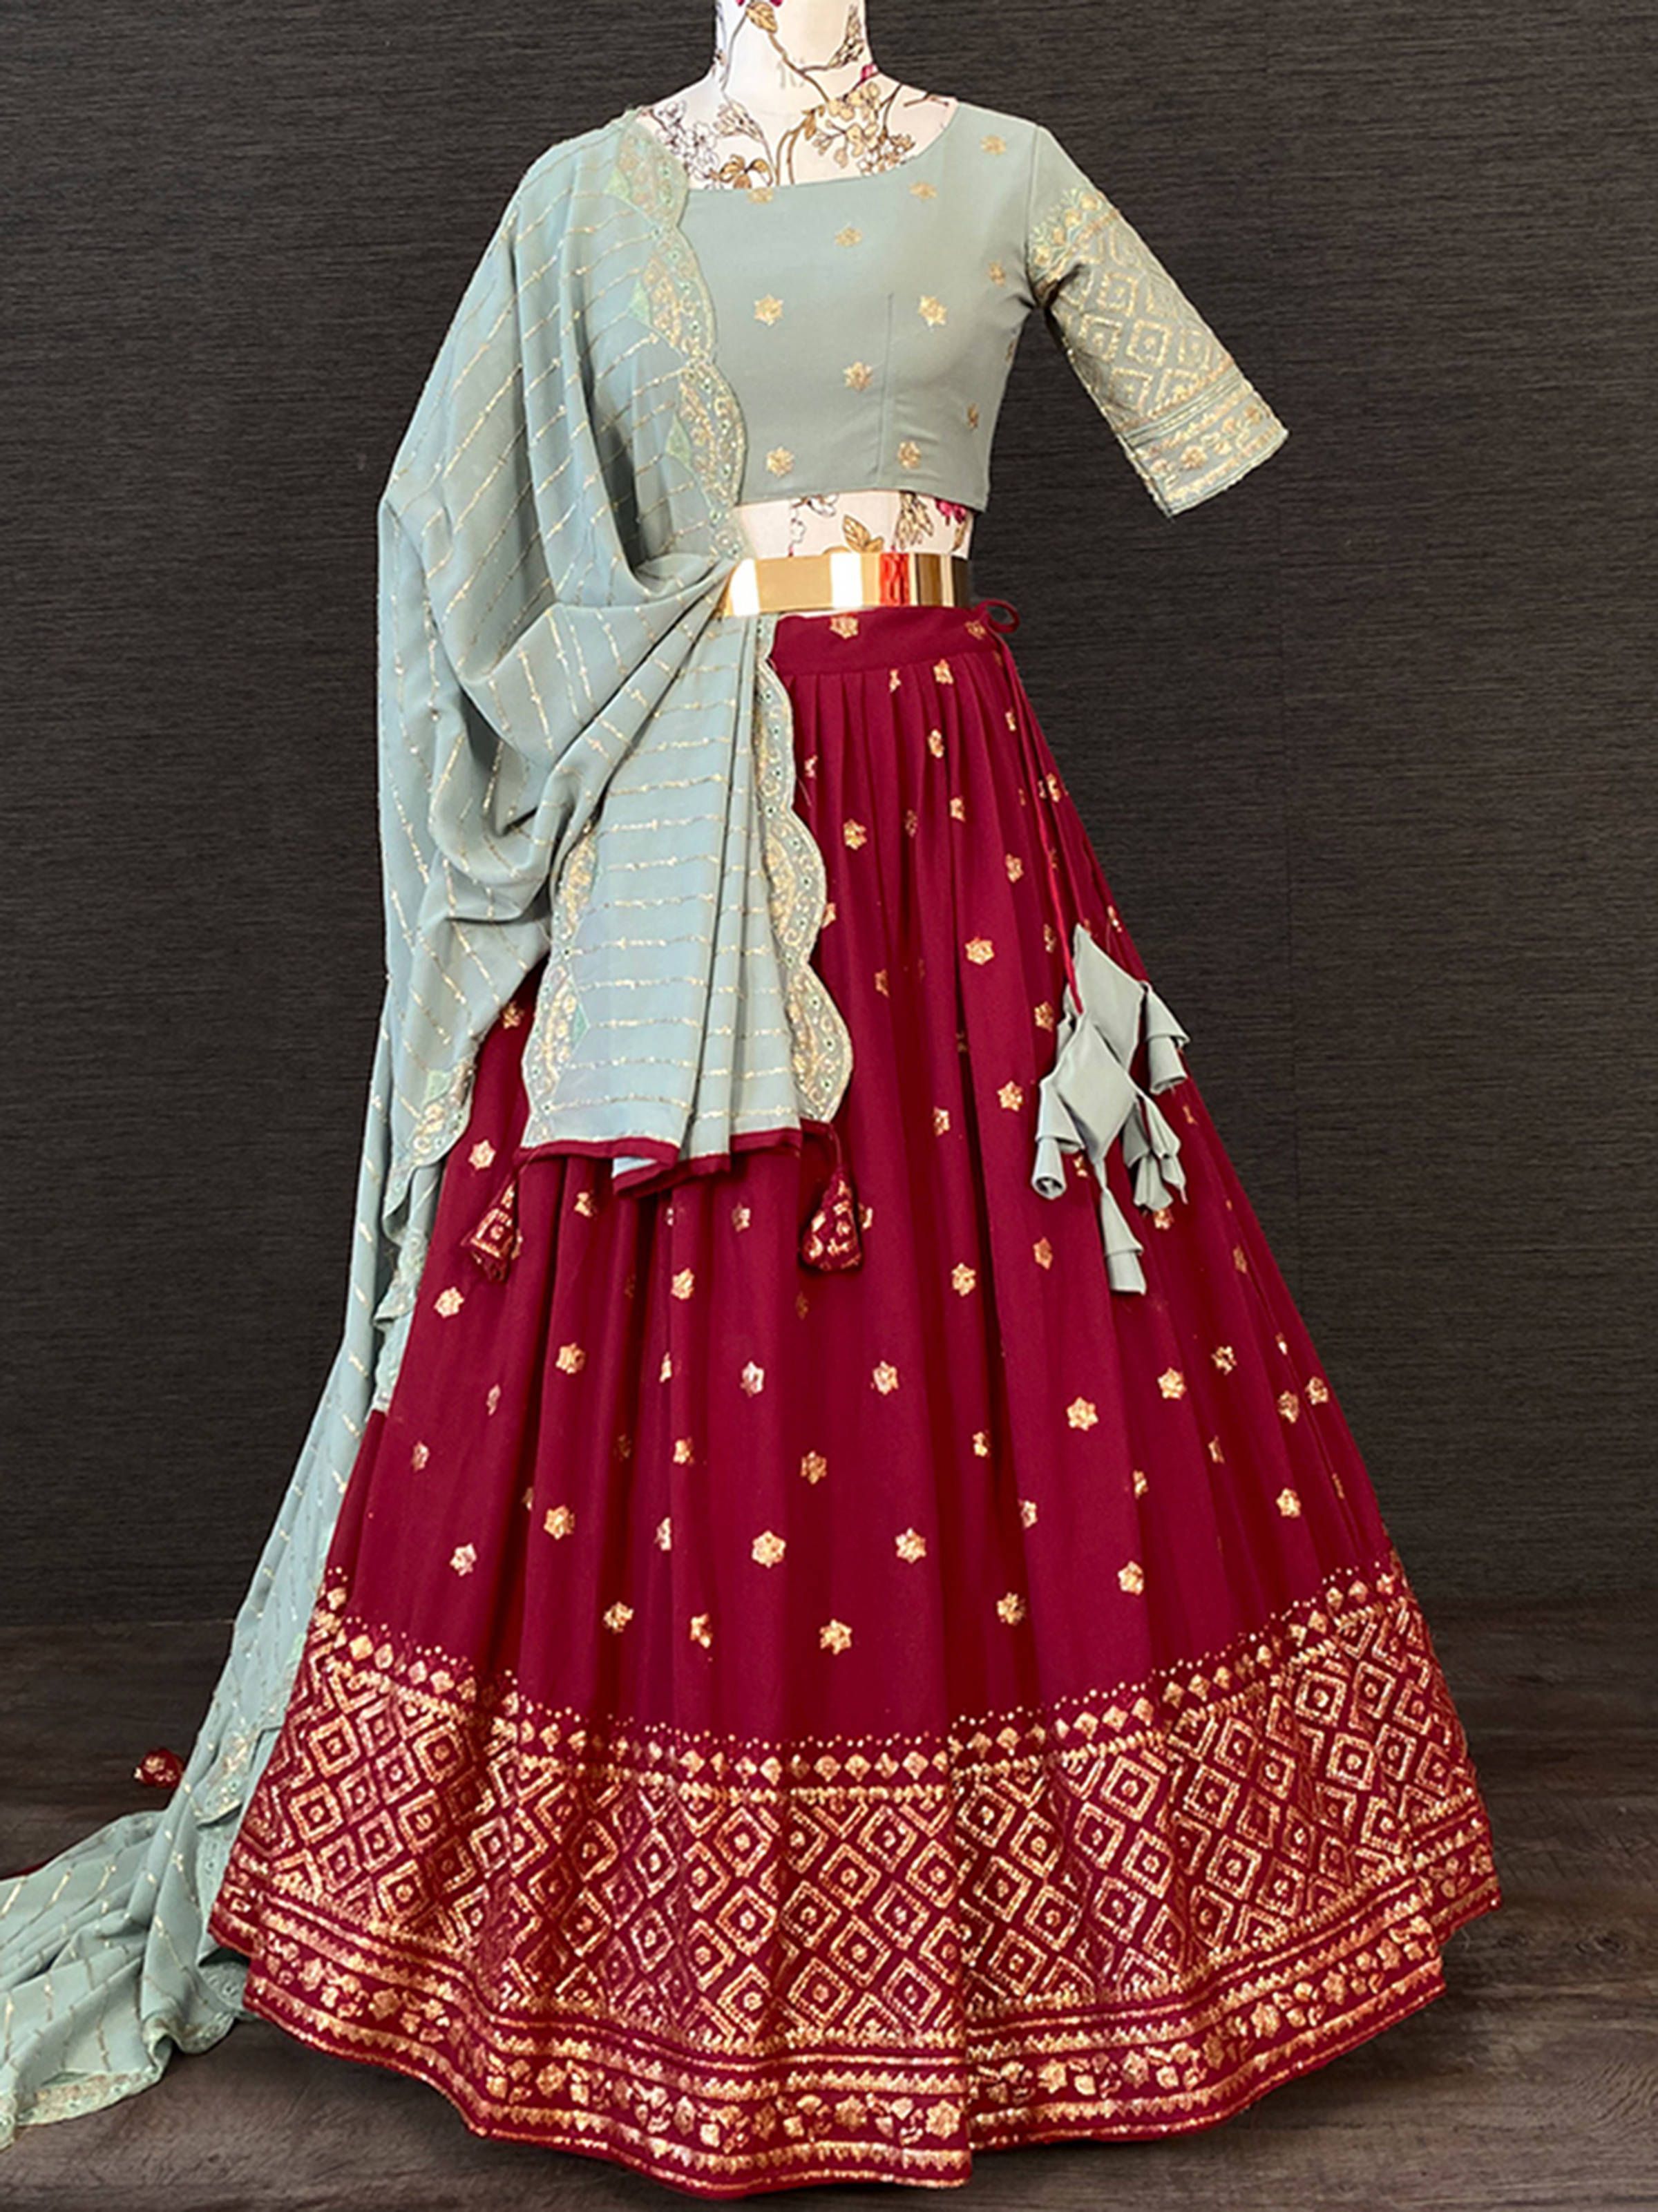 Lovely Maroon Sequins Embroidered Georgette Party Wear Lehenga Choli